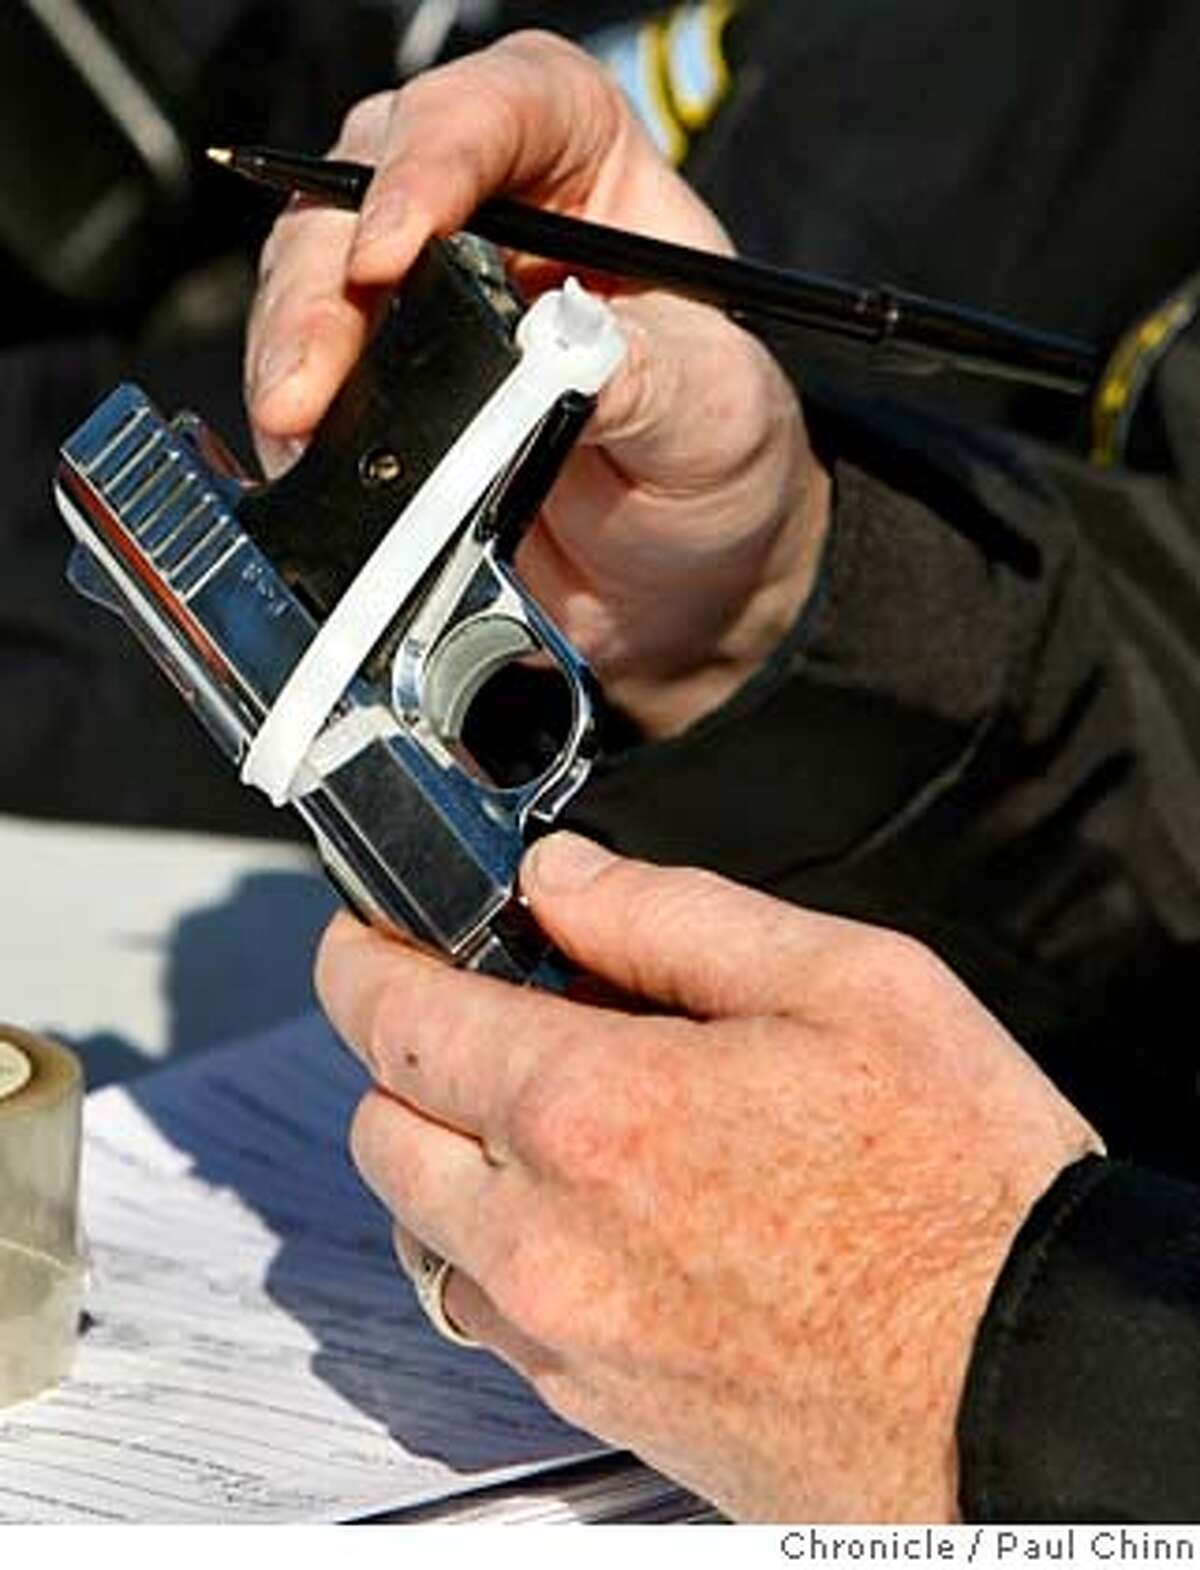 A police officer checks the serial number of a handgun turned in by a resident in exchange for gift cards at the Gifts for Guns program at Civic Center Plaza in San Francisco, Calif. on Saturday, Dec. 1, 2007. It was the second exchange program sponsored by the Mayor's Office of Criminal Justice this year. PAUL CHINN/The Chronicle